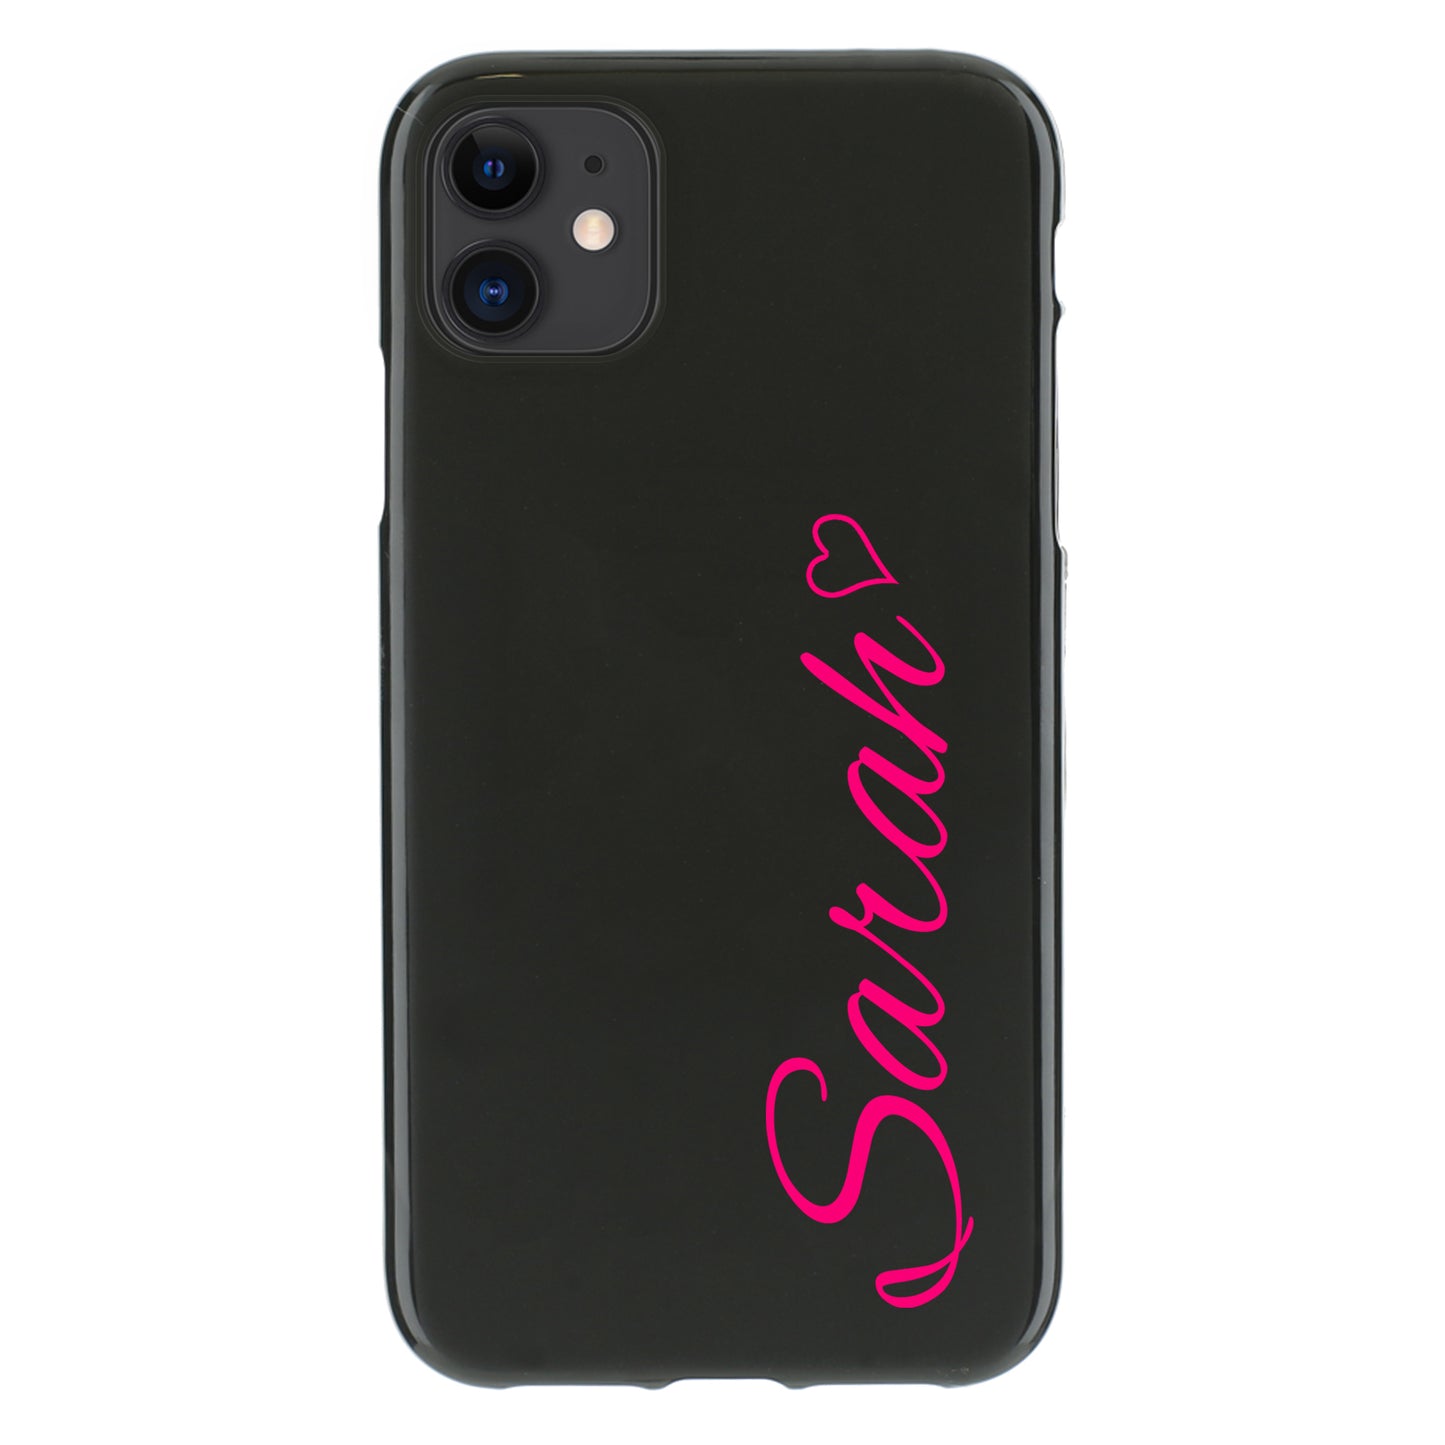 Personalised Motorola Phone Gel Case with Hot Pink Heart Accented Text